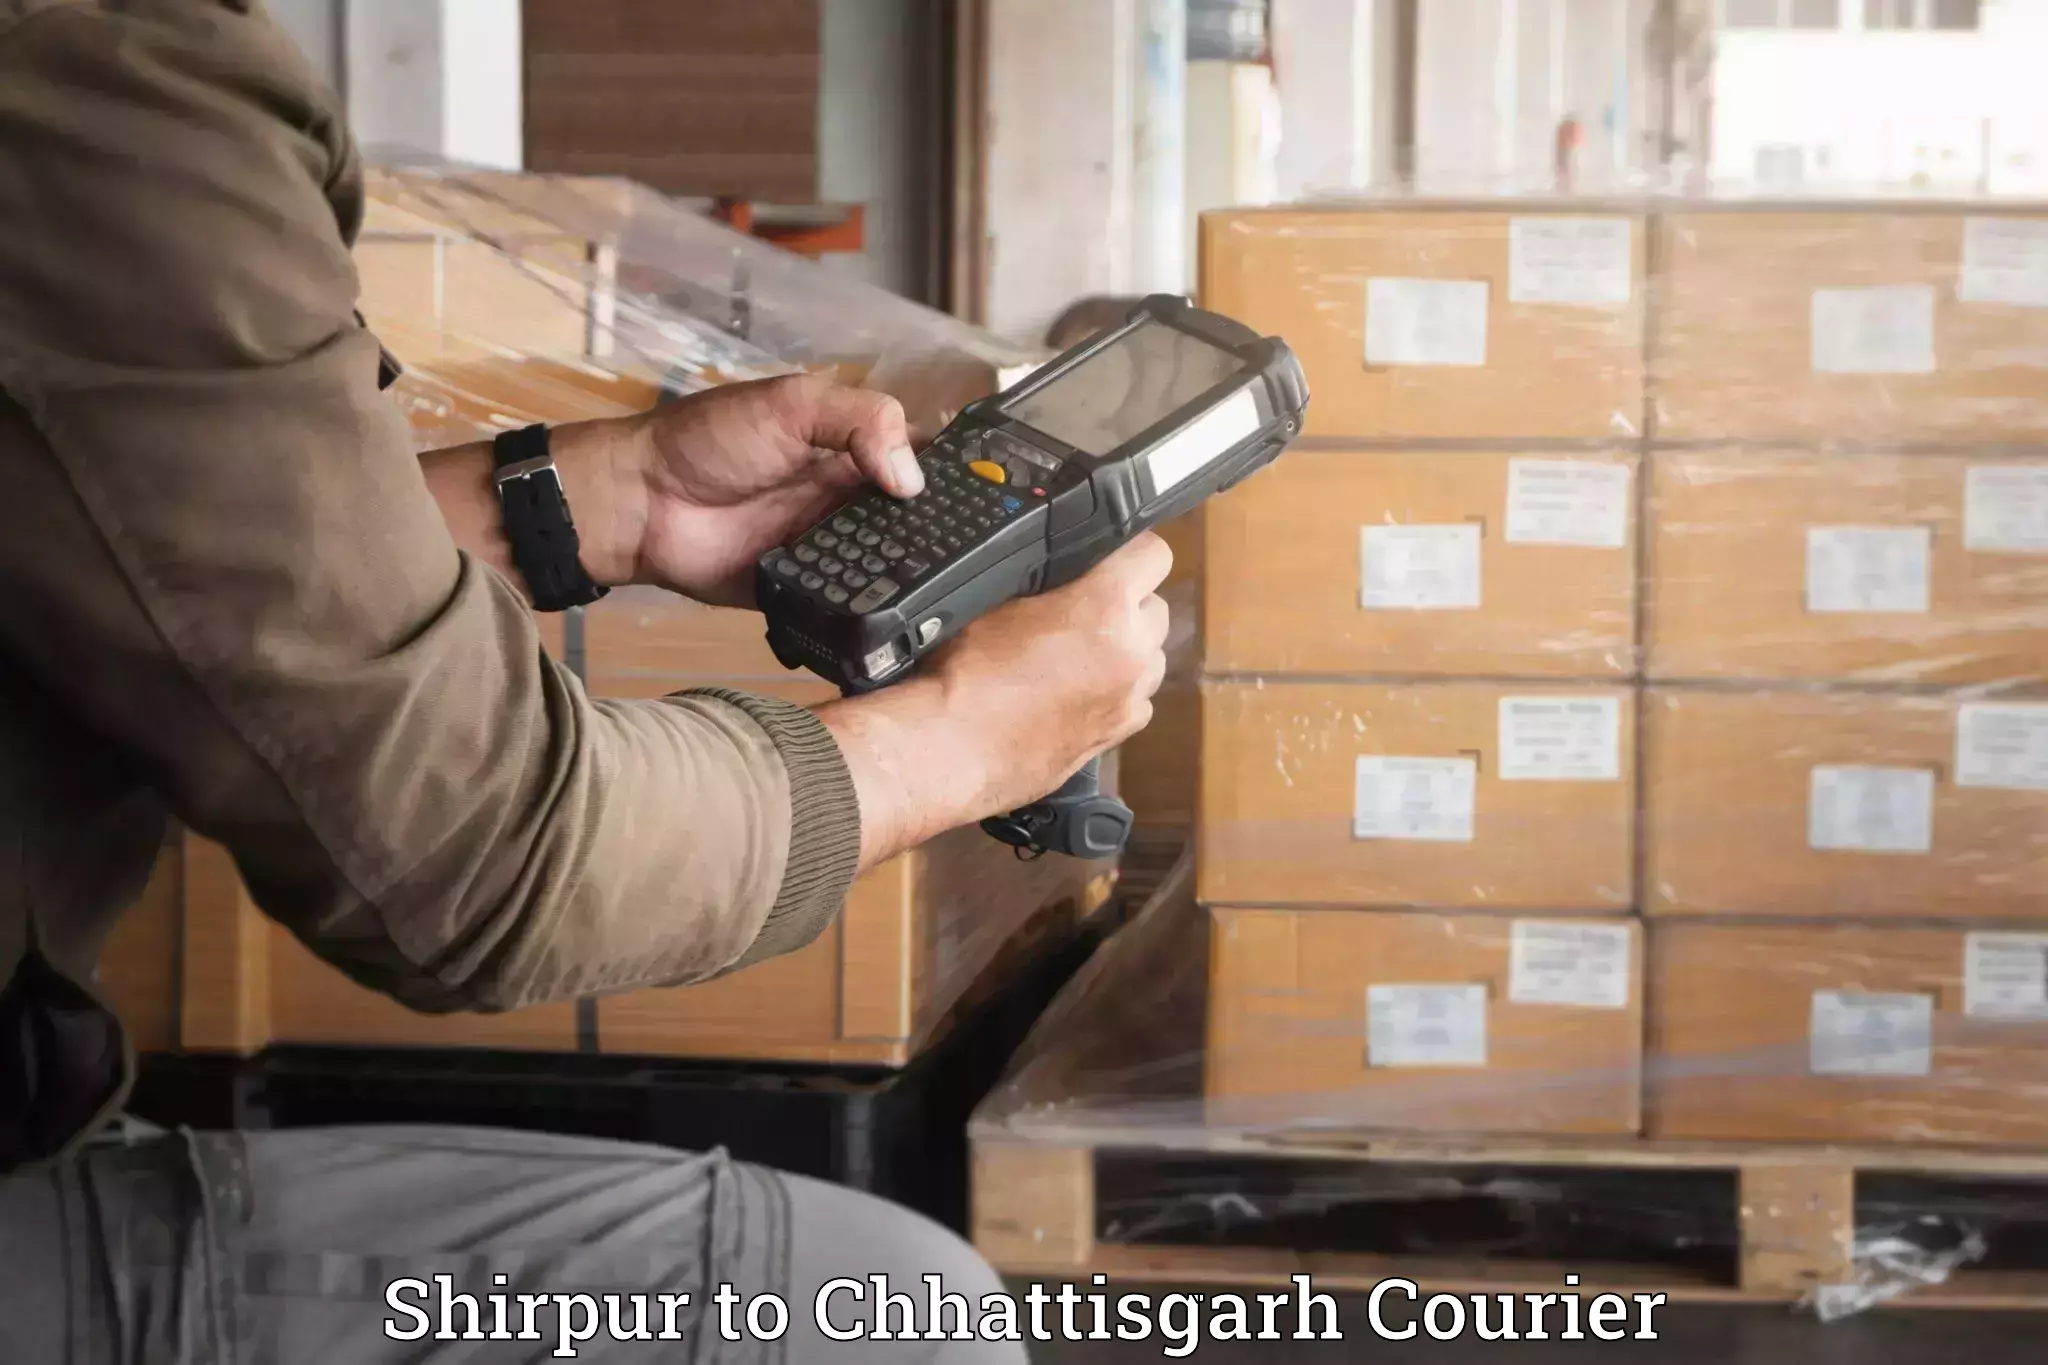 Luggage transport consultancy Shirpur to Sirpur